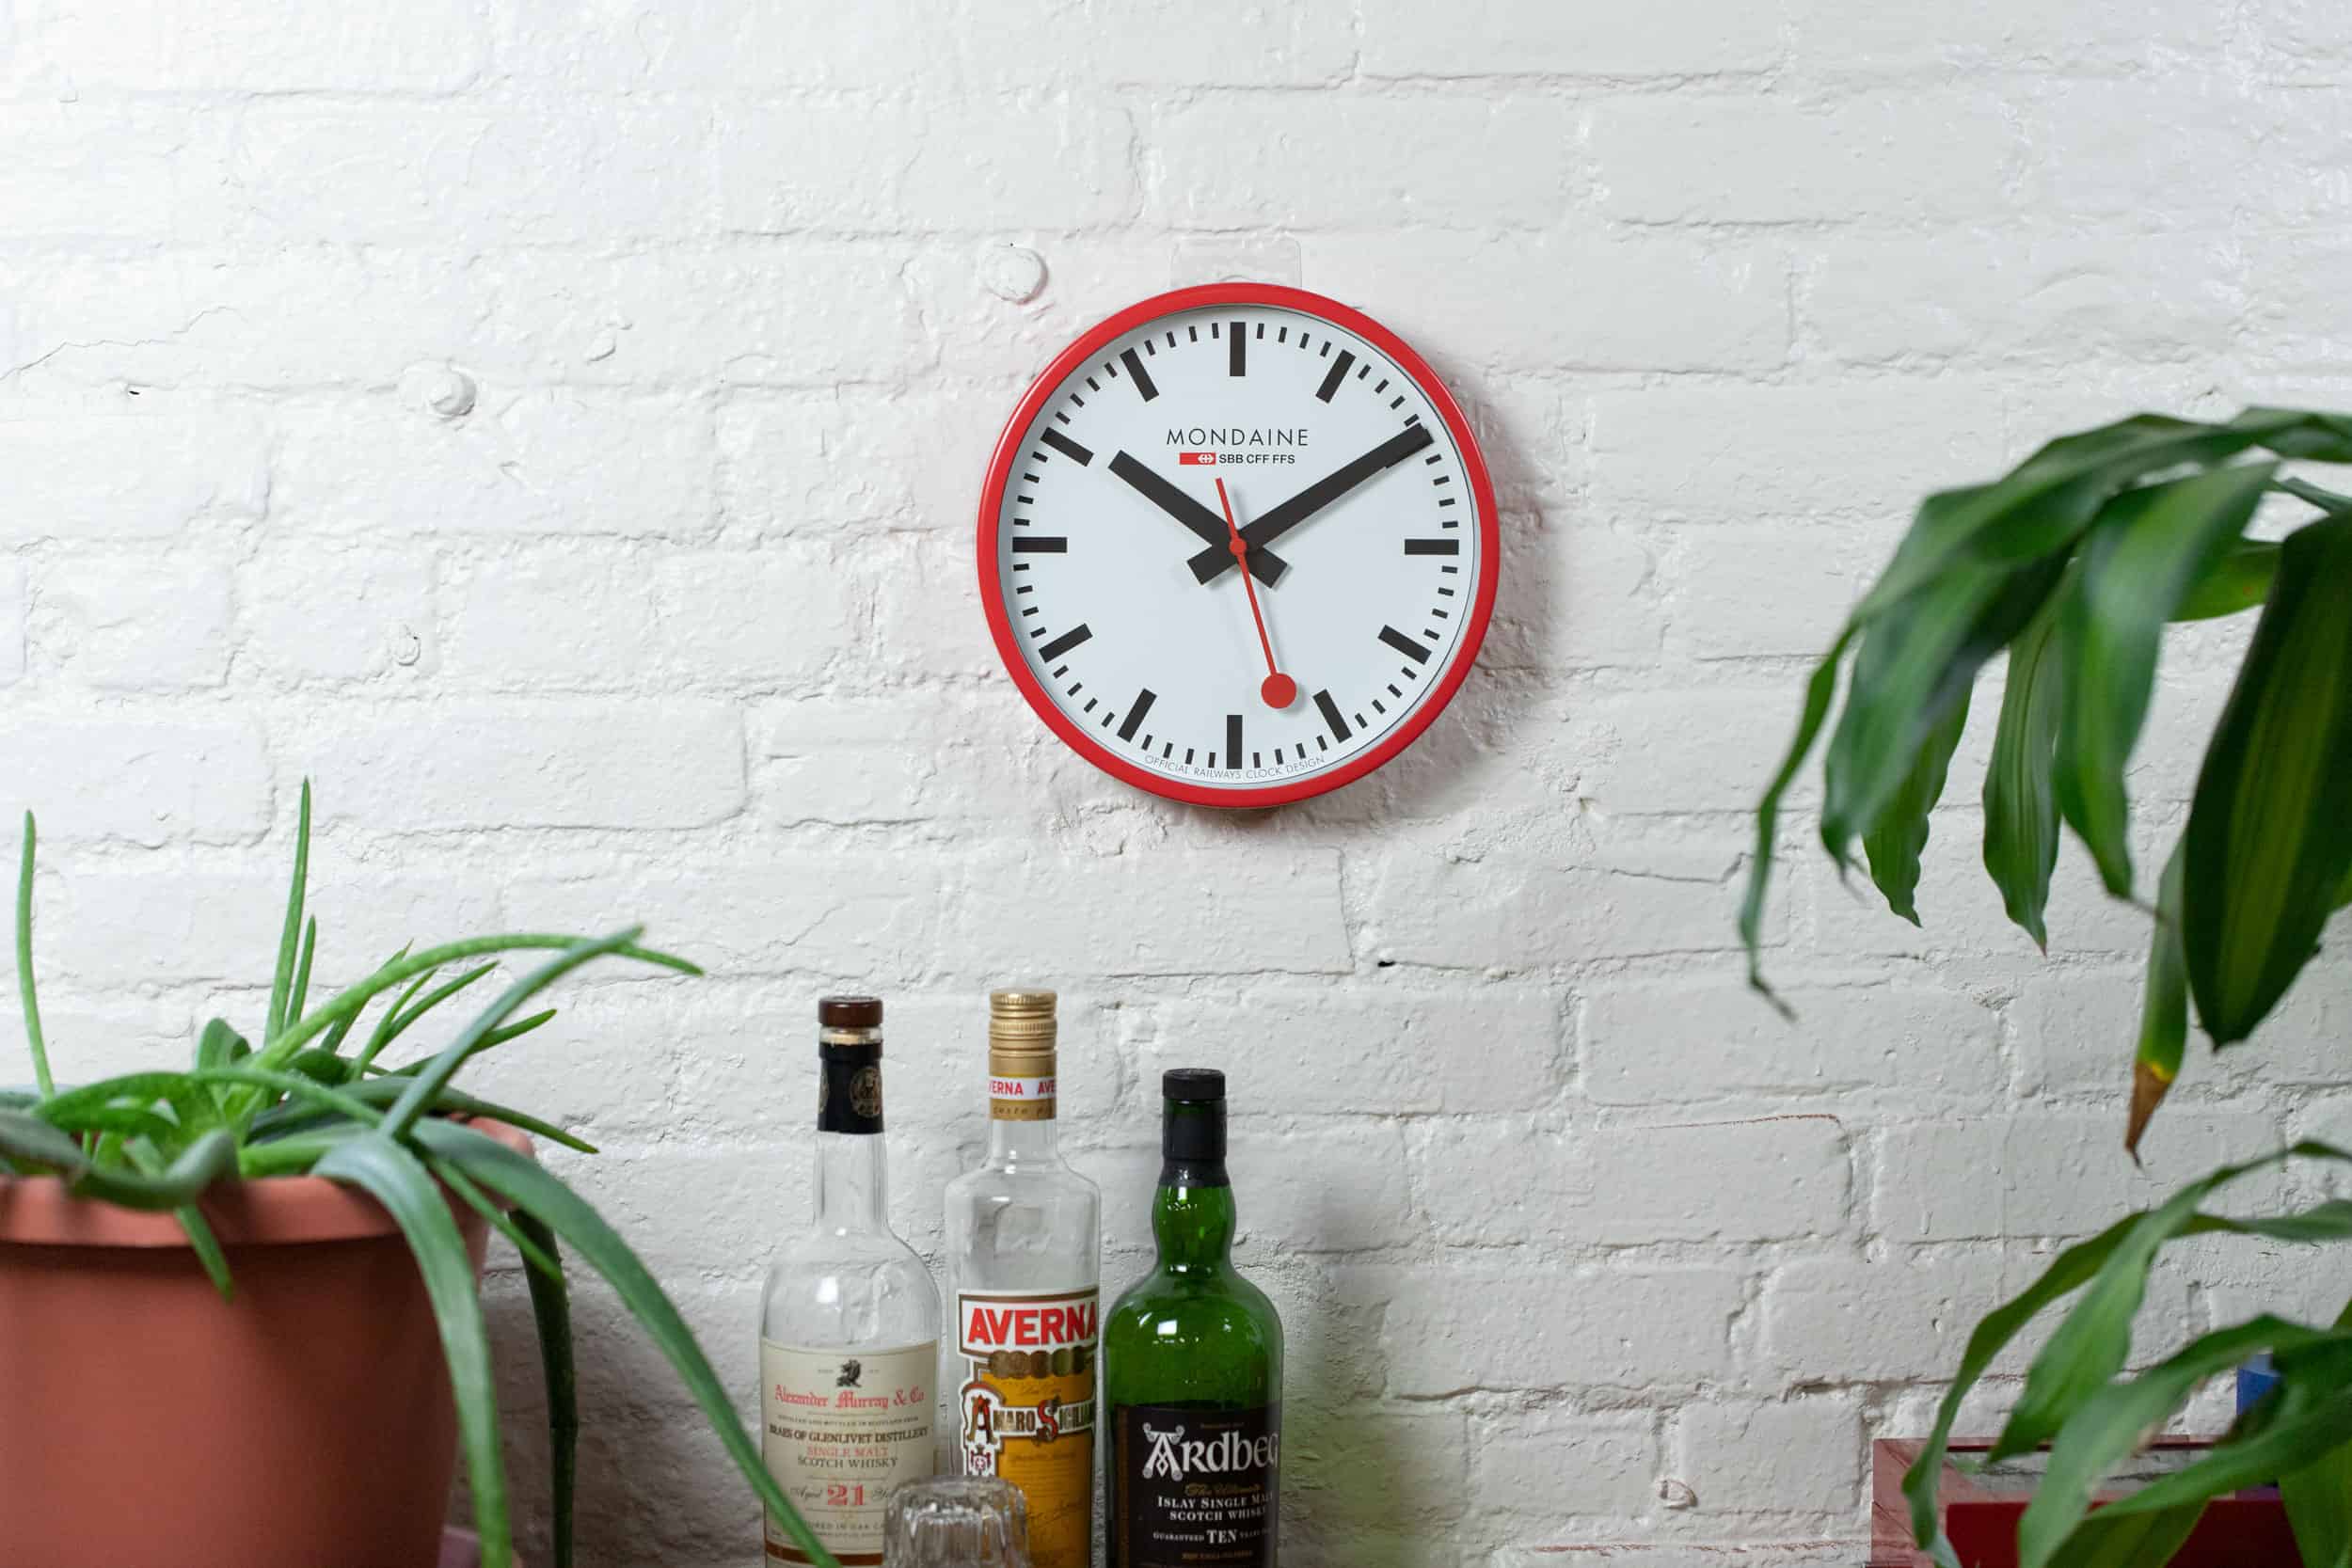 Introducing a Newly Expanded Home Goods Section with Clocks and More – Now at the Windup Watch Shop